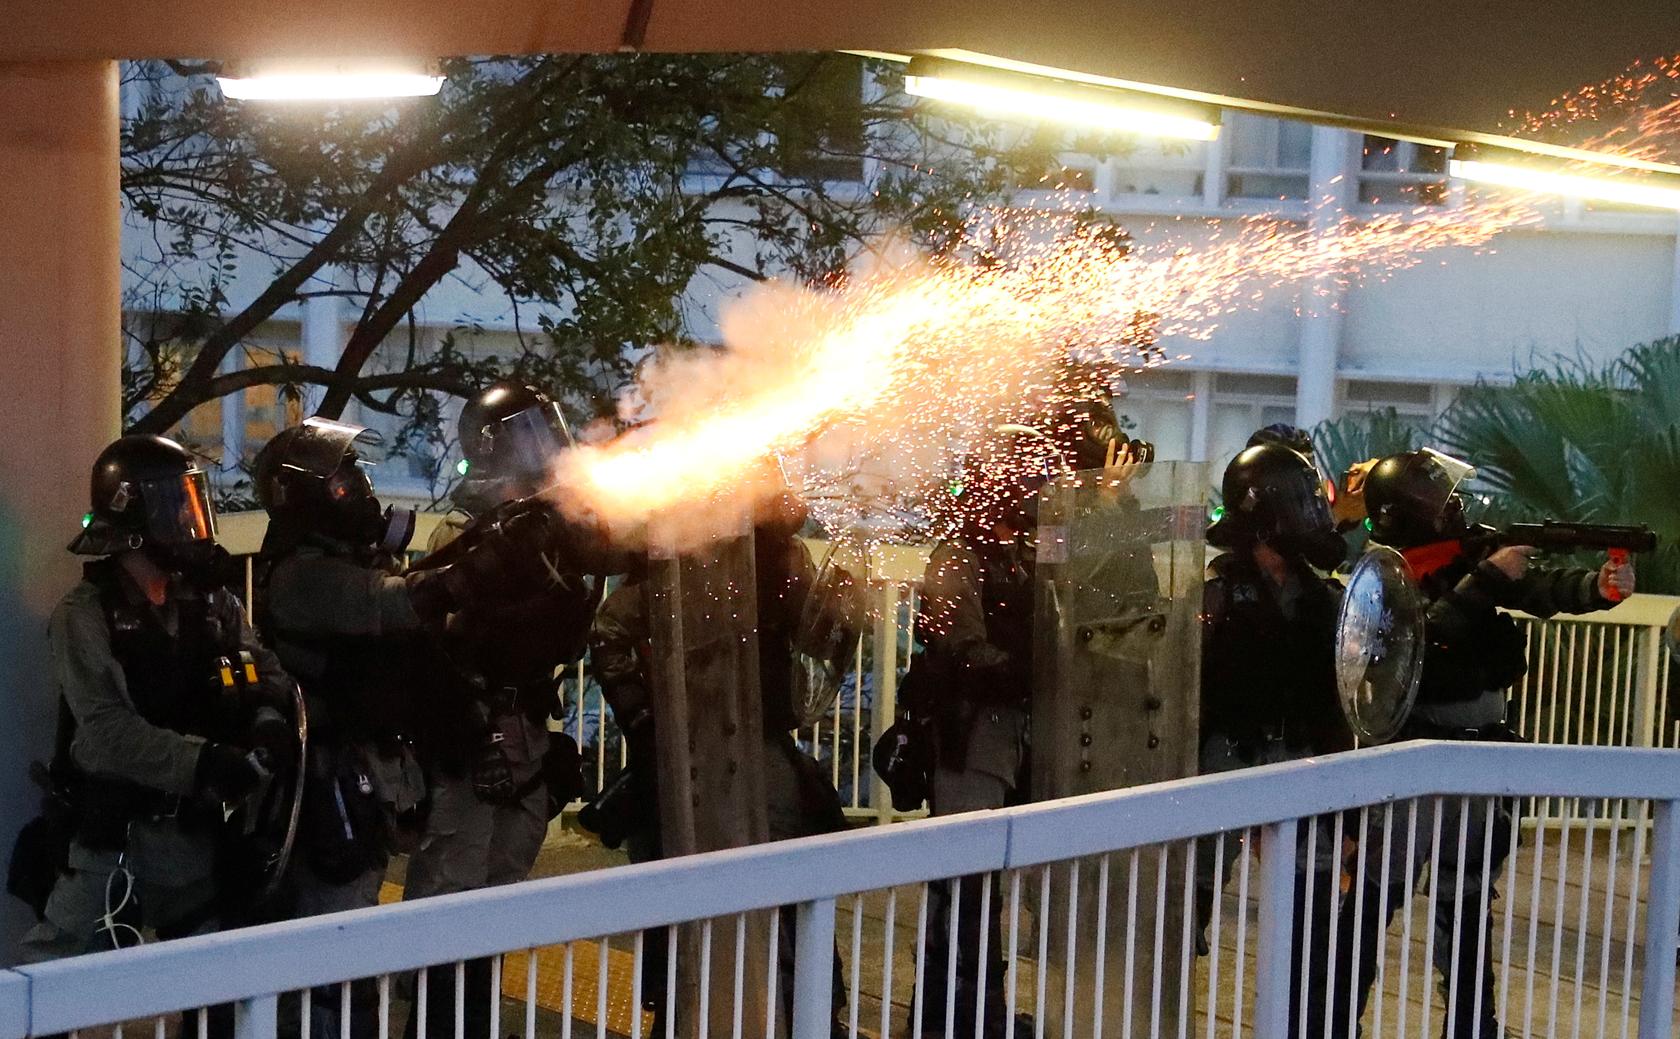 Hong Kong police fires tear gas, water cannon at protesters